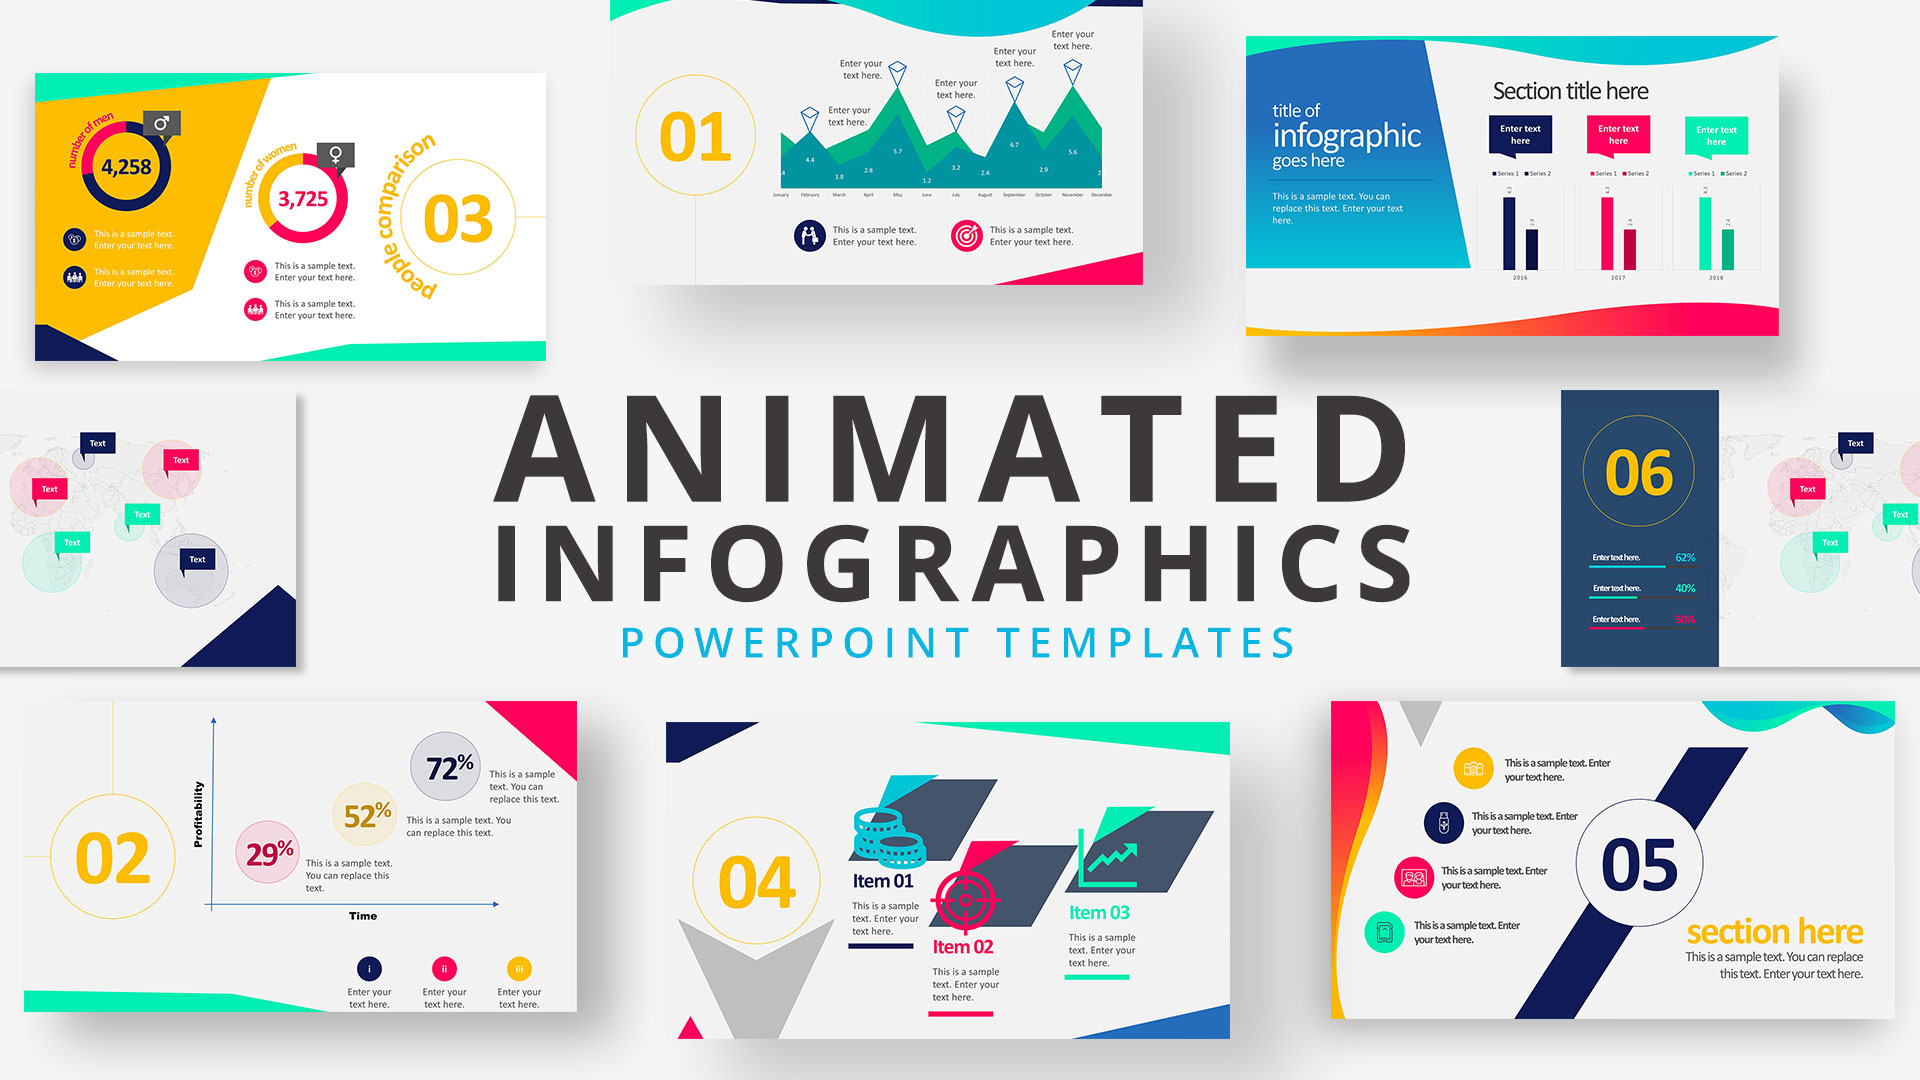 Powerpoint infographic template free download download photos from my iphone to my pc